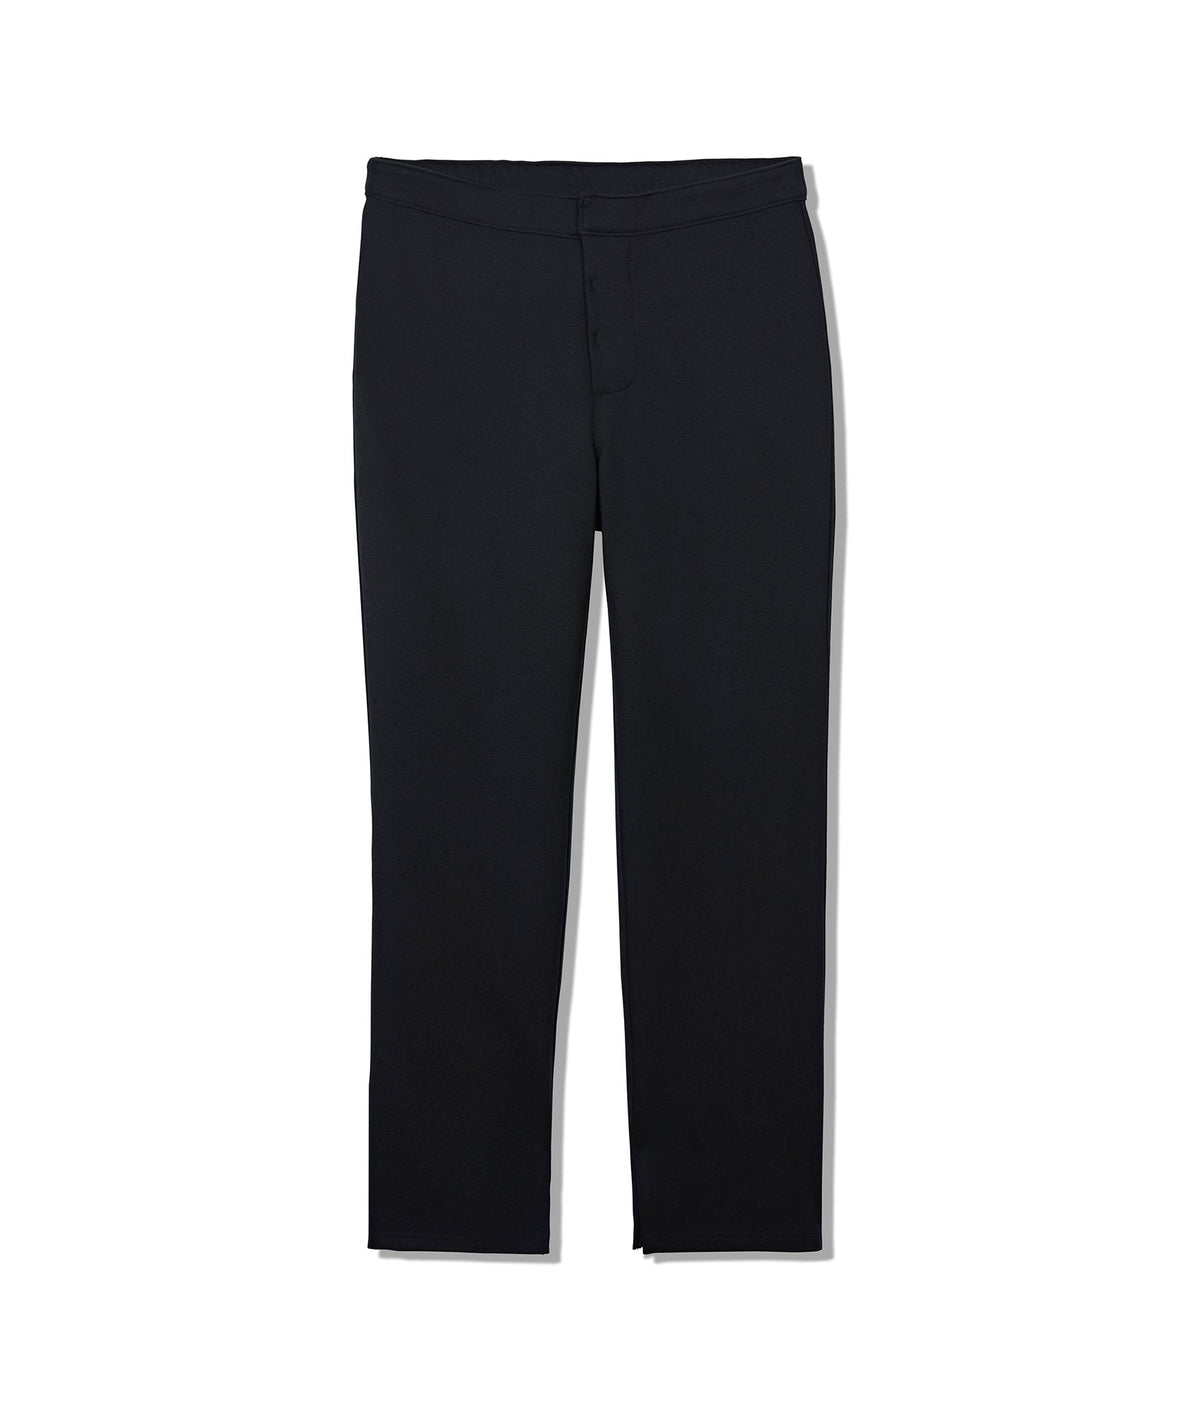 The Lucy Straight Leg Pant - Seated Fit in Black